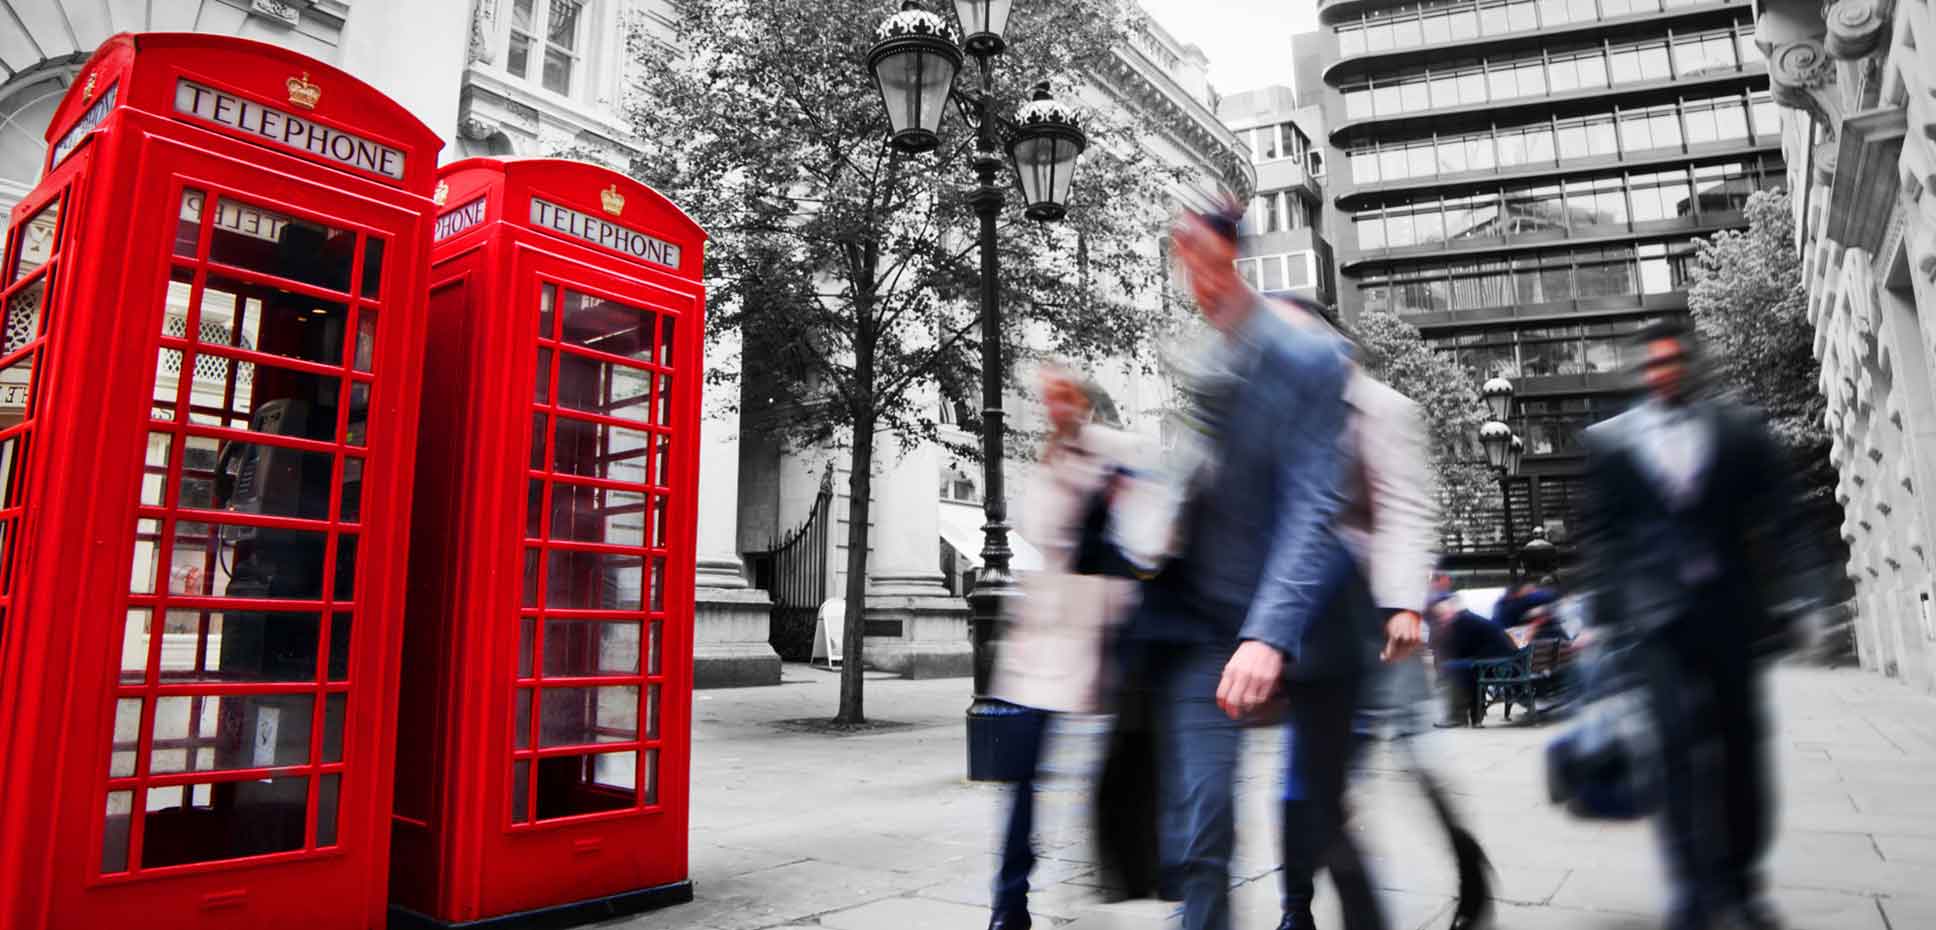 Shot of busy London street with two phone booths